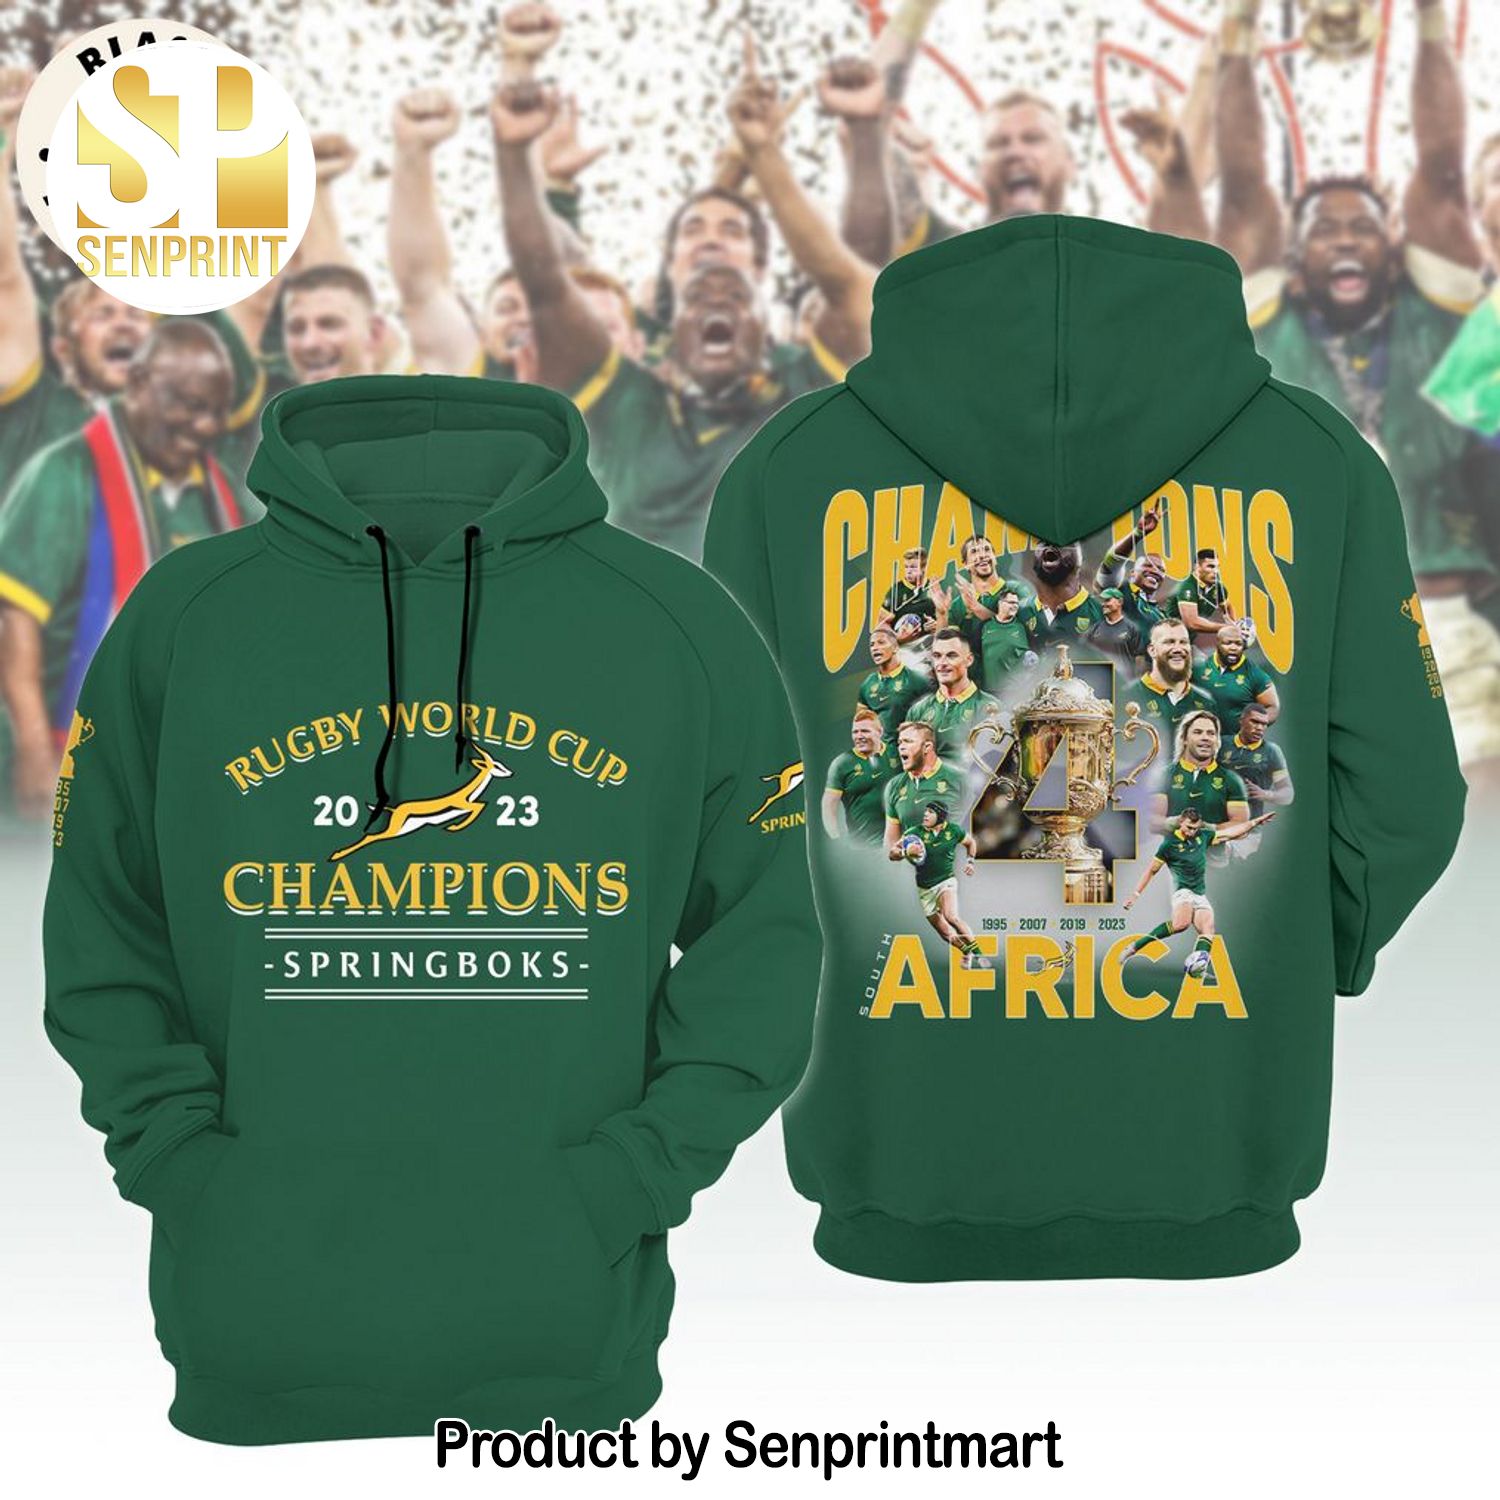 Springboks World Cup 2023 Champions Africa Character Design 3D Shirt